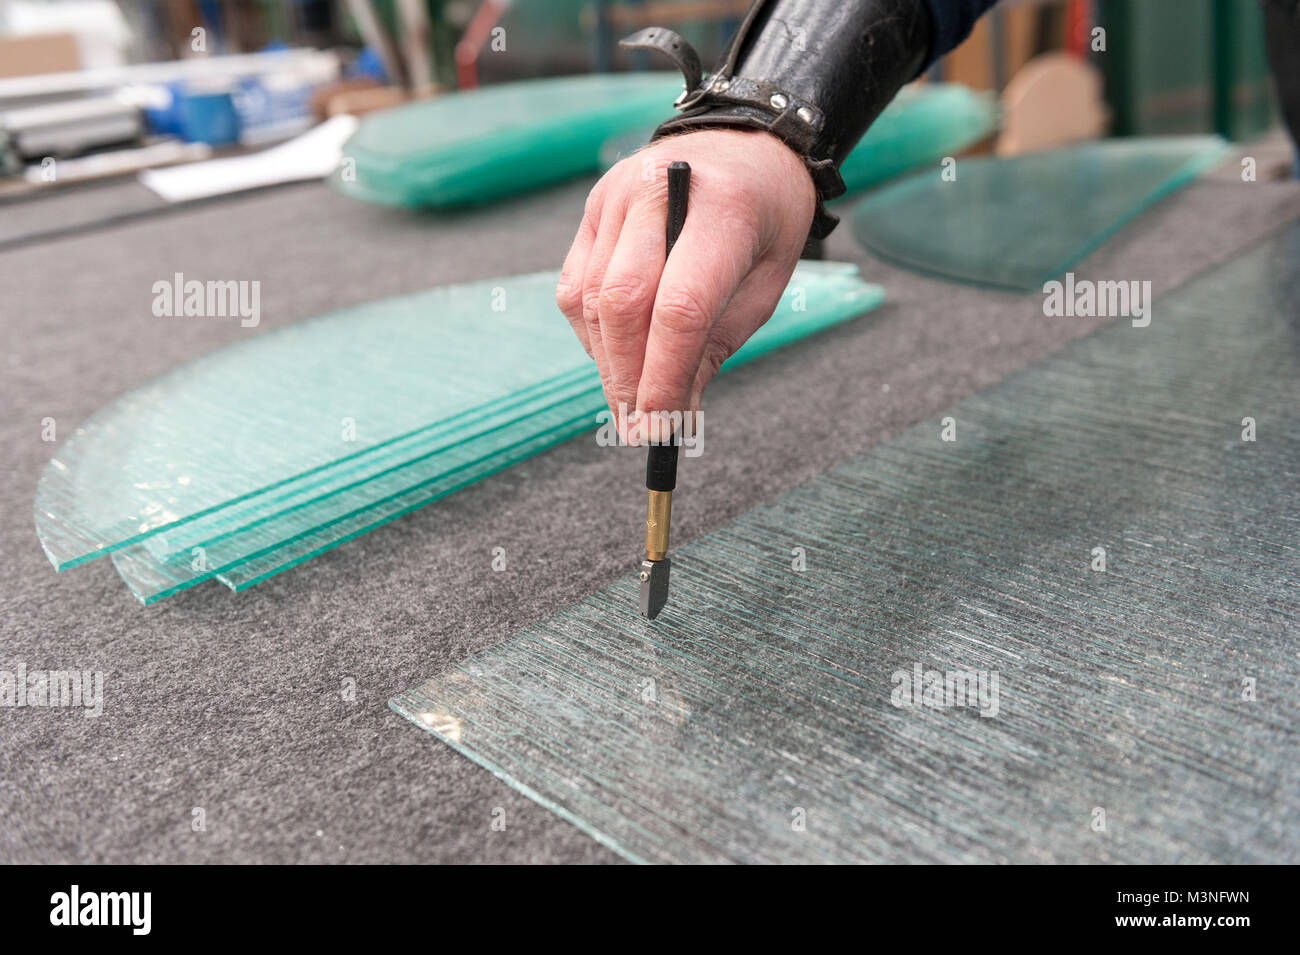 Glass Cutter Tool For Cutting Glass With Iron Wheels Stock Photo - Download  Image Now - iStock